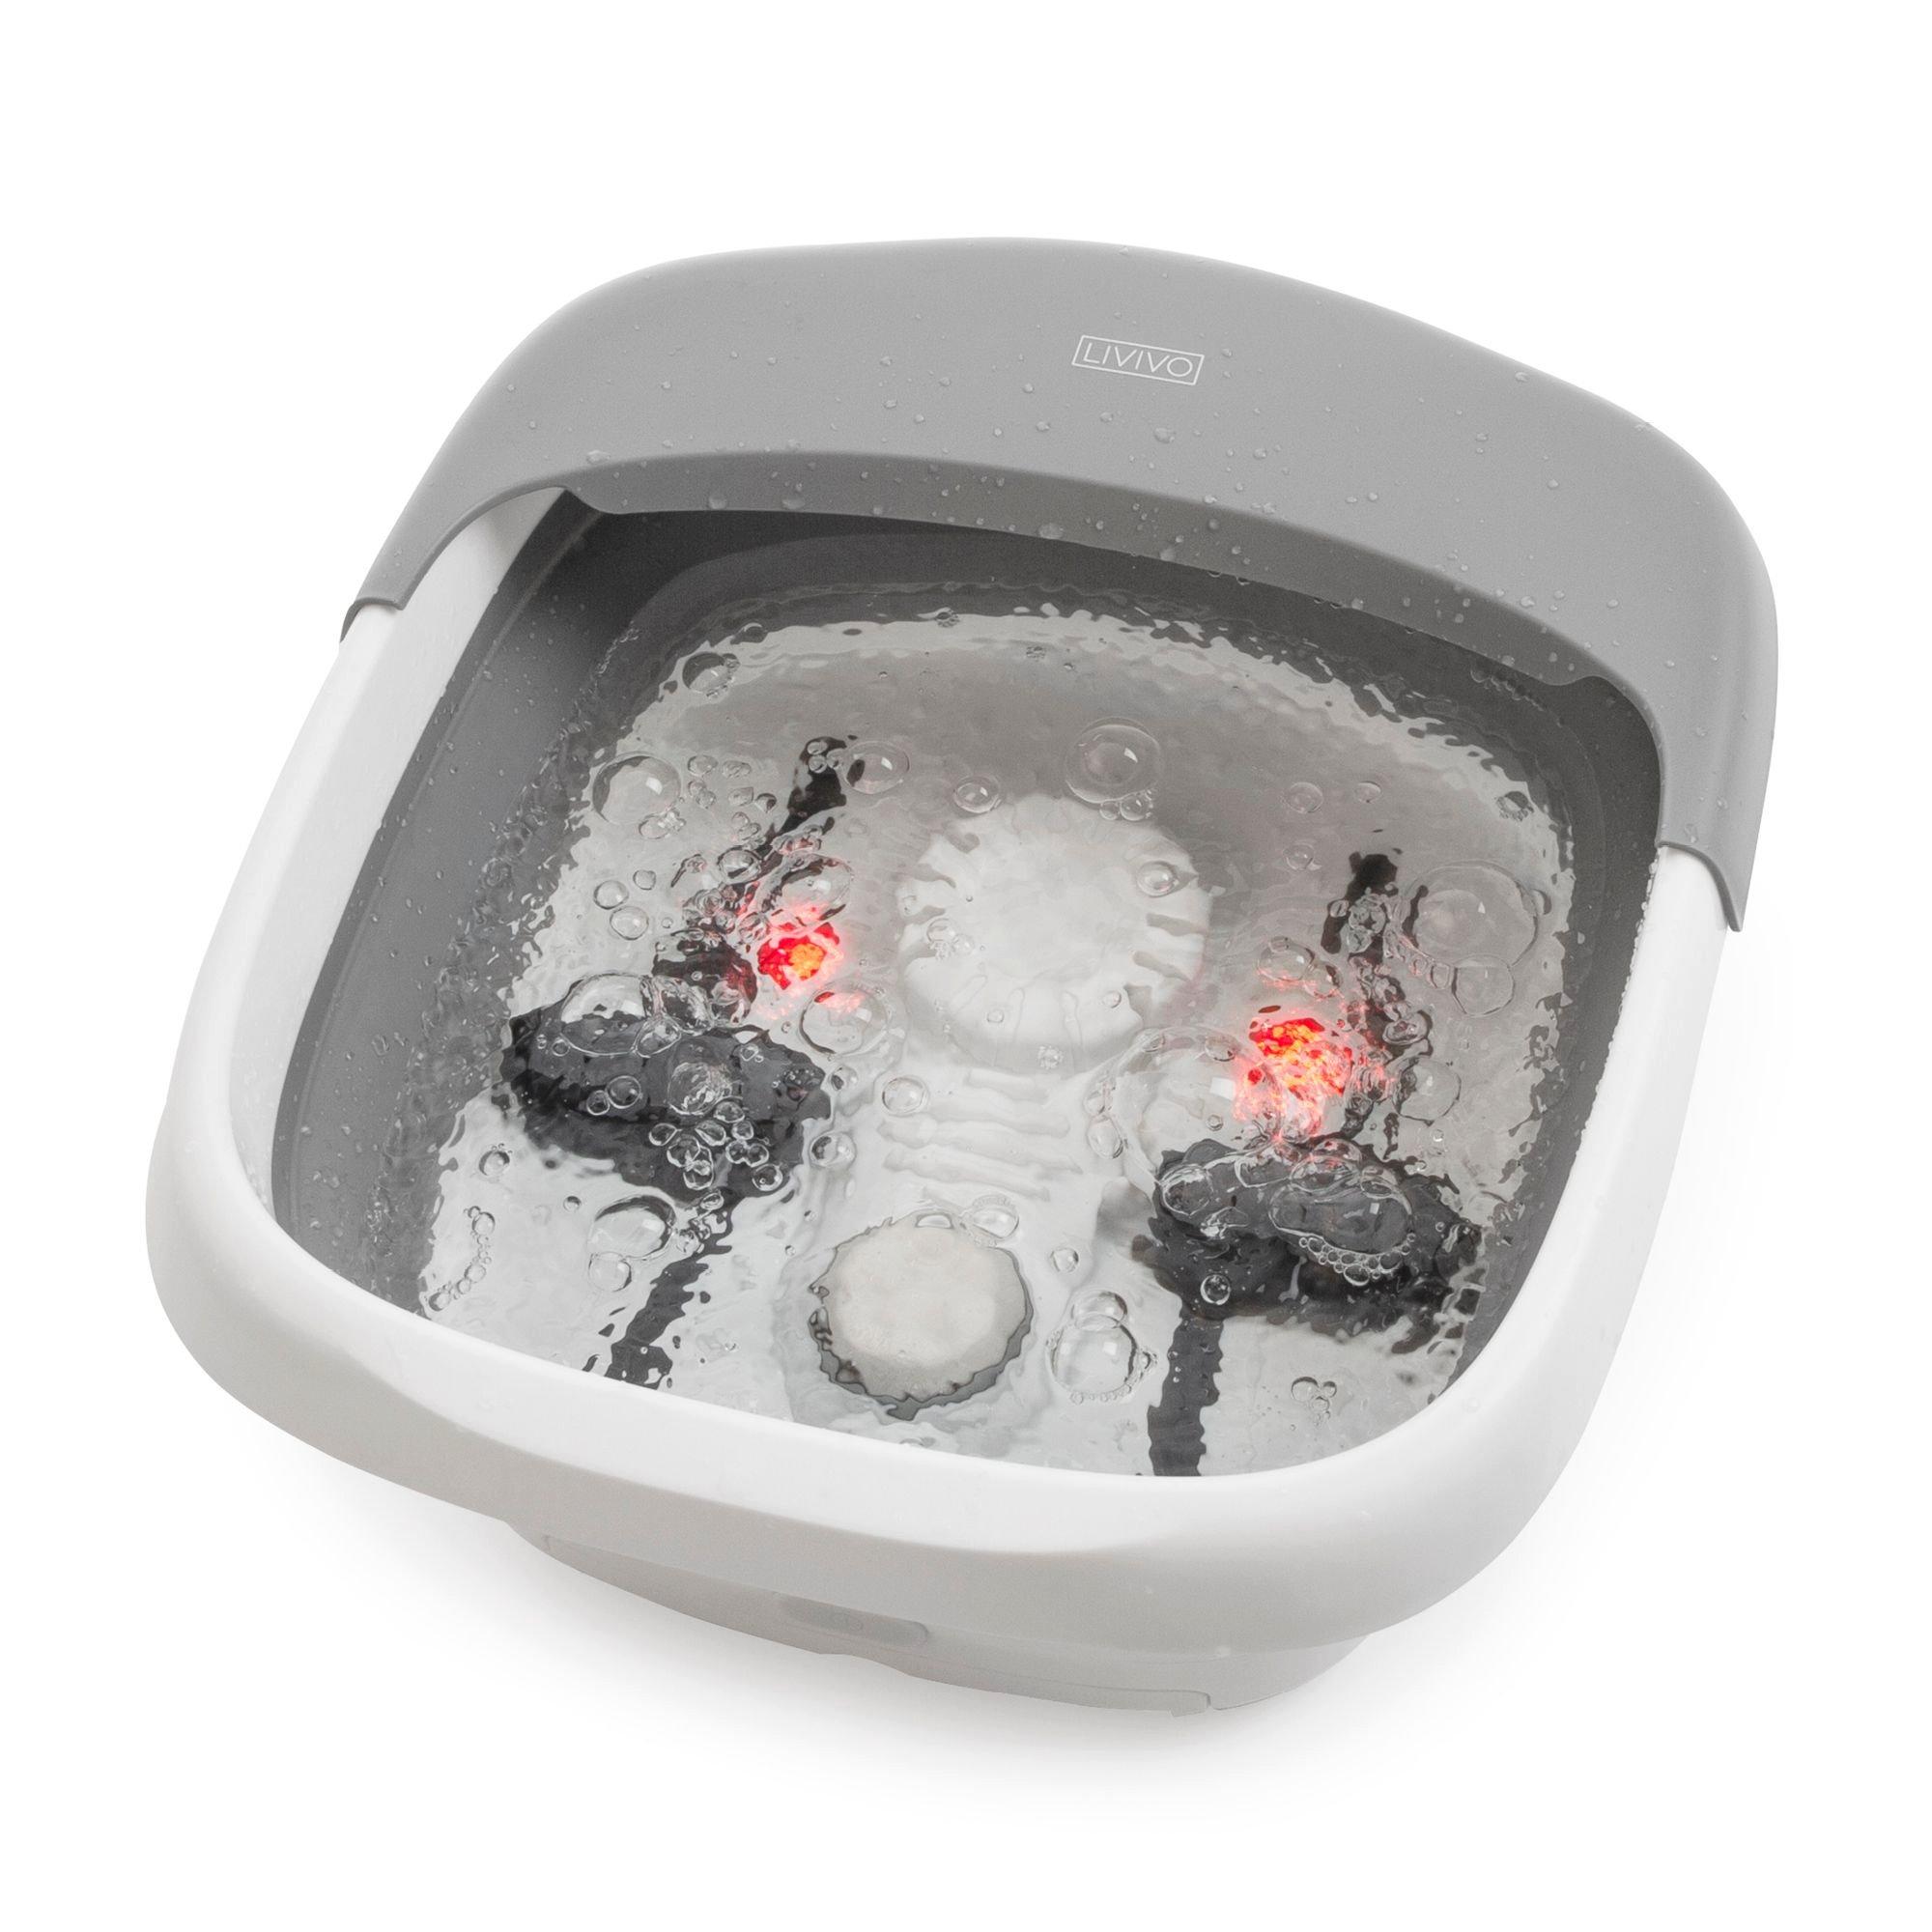 Deluxe Heated Multi-Function Foot Spa